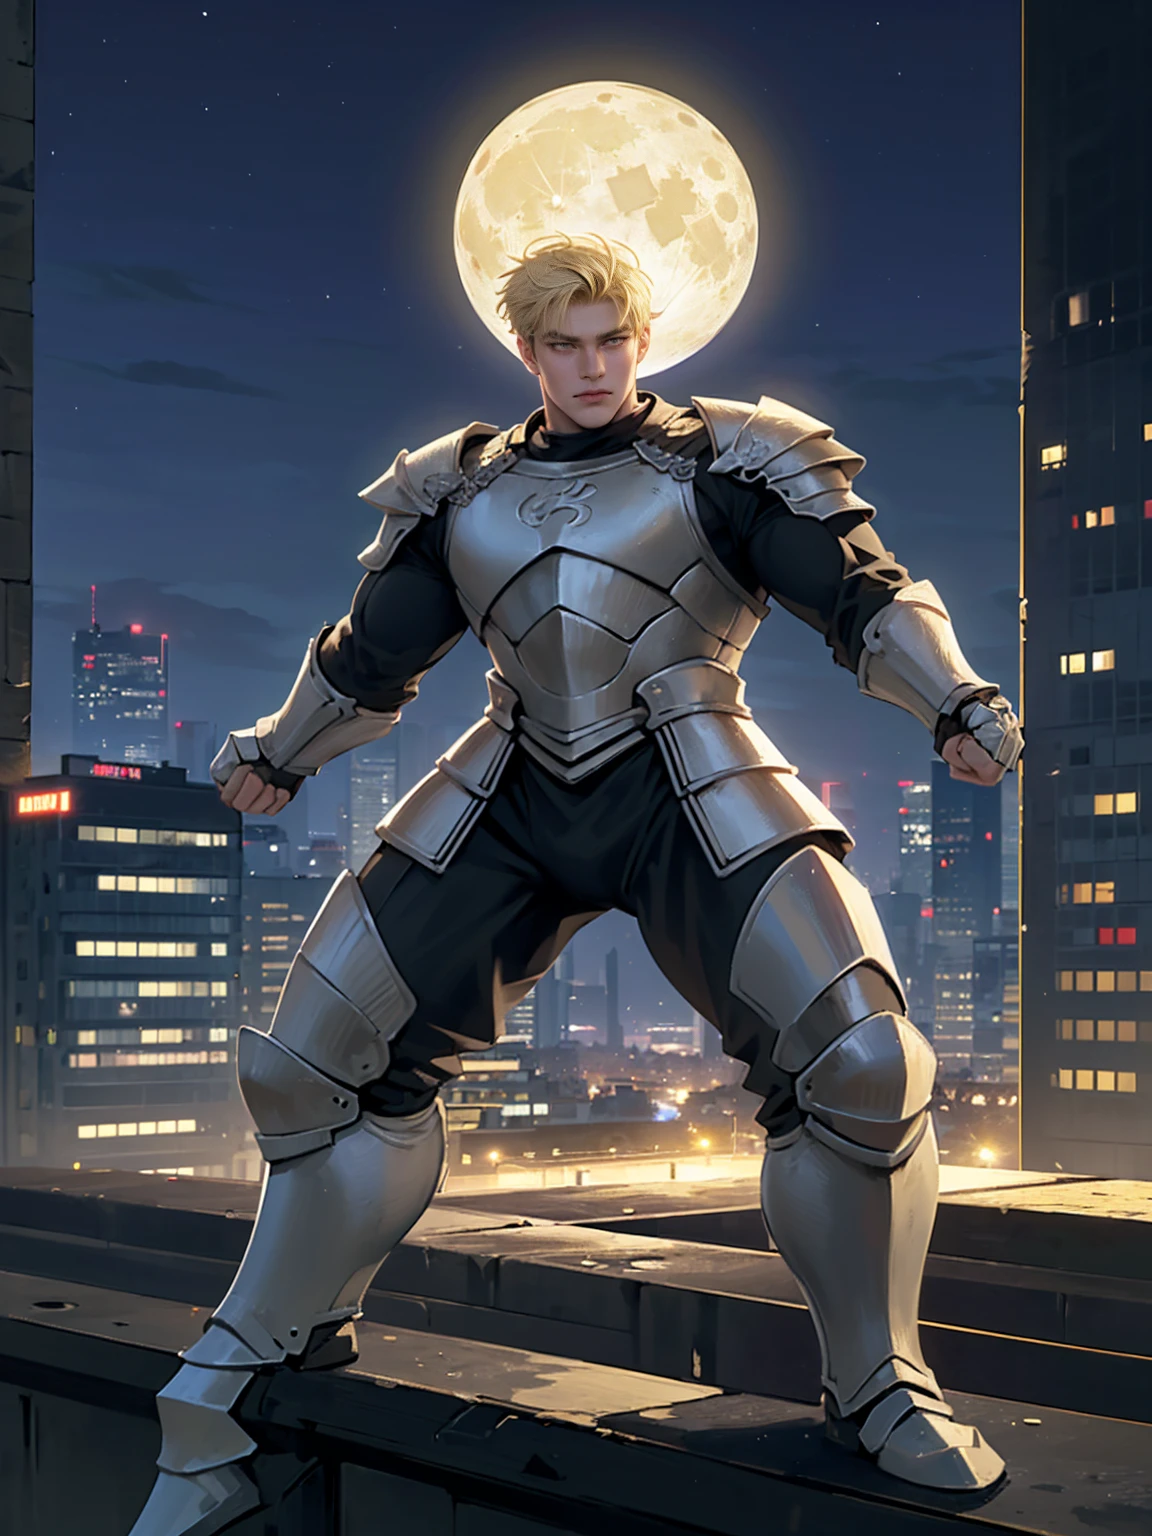 (masterpiece, 4K resolution, Surreal, Very detailed), (Knight theme, Charming, There was a boy at the top of the city, Knight in silver armor, He's a superhero), [ ((20 years), (Blonde short hair:1.2), whole body, (Yellow eyes:1.2), ((Fighting Stance),demonstration of strength), ((Sandy urban environment):0.8)| (city View, night, Dynamic Lighting), (Full Moon))